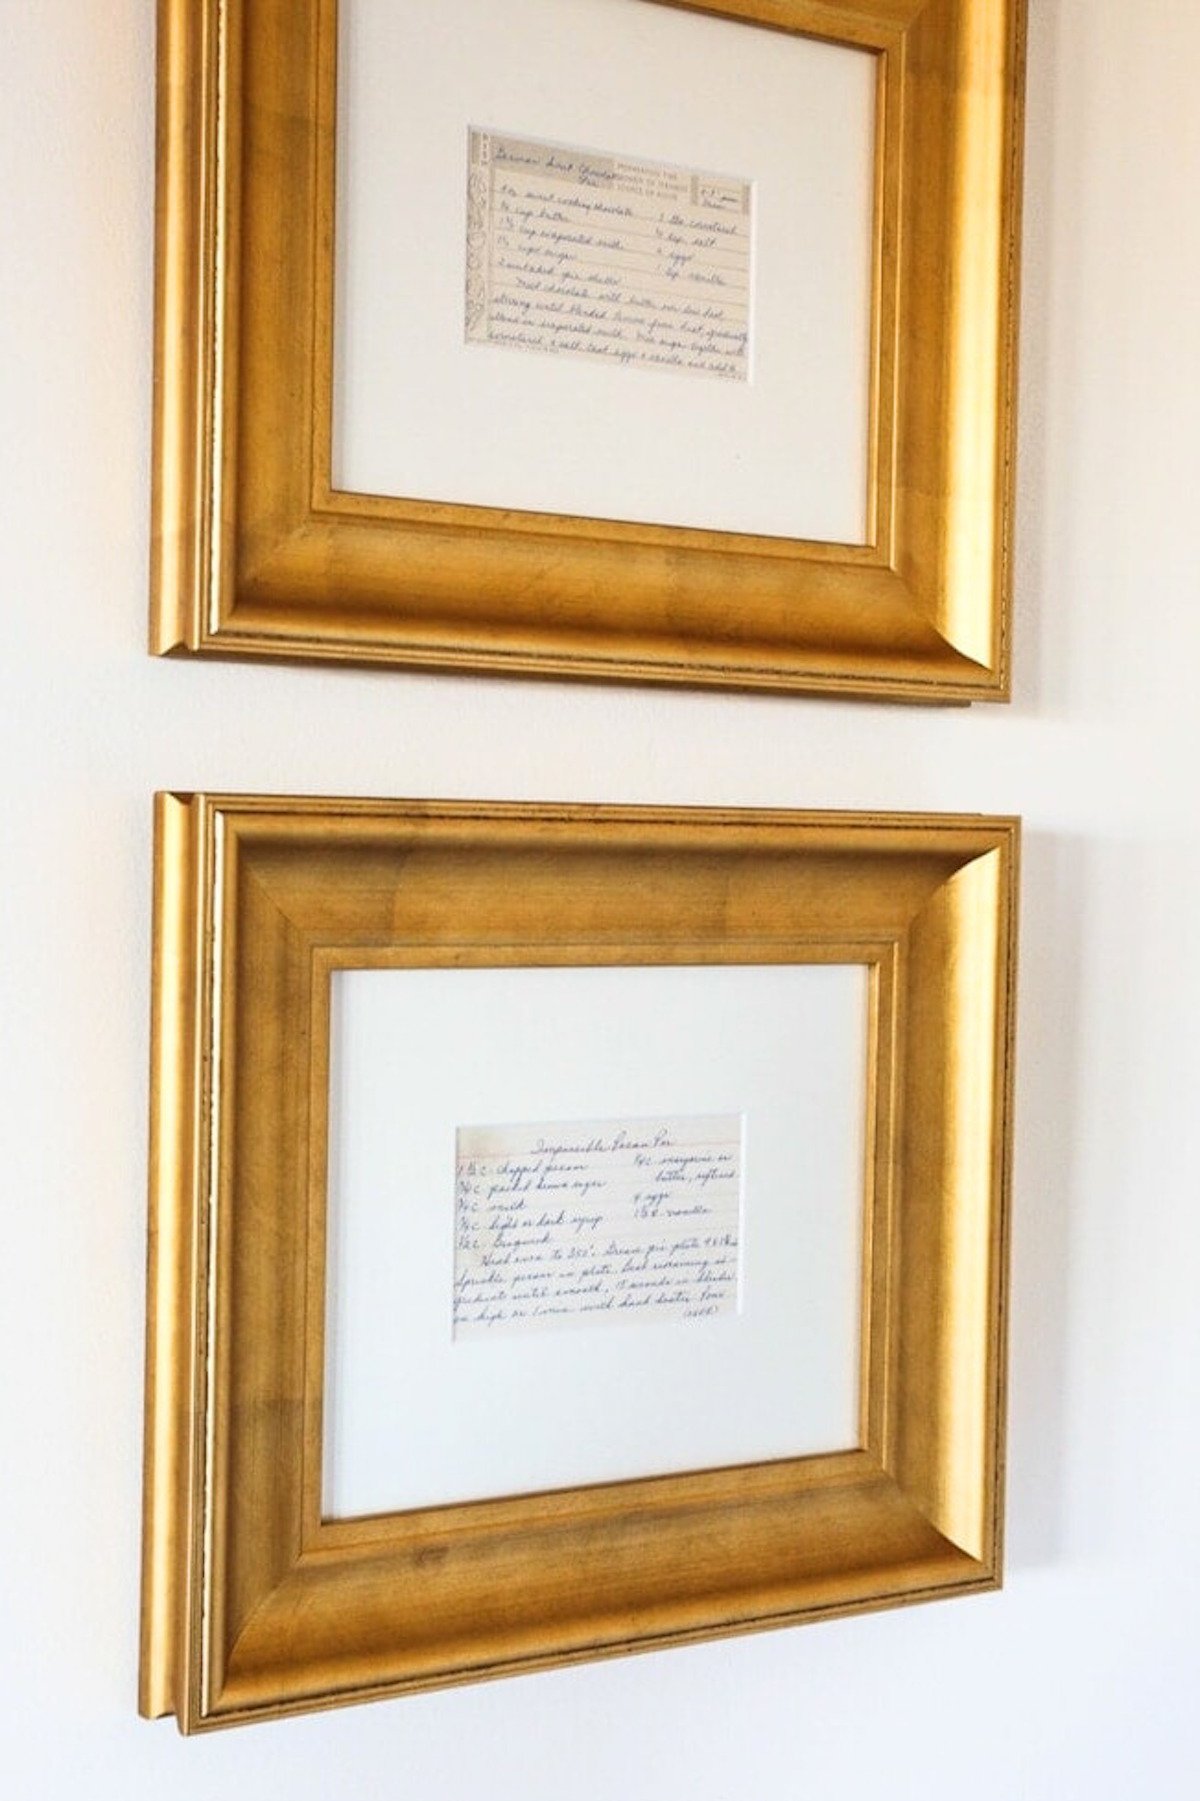 Framed recipes in wide gold frames against a white wall. 